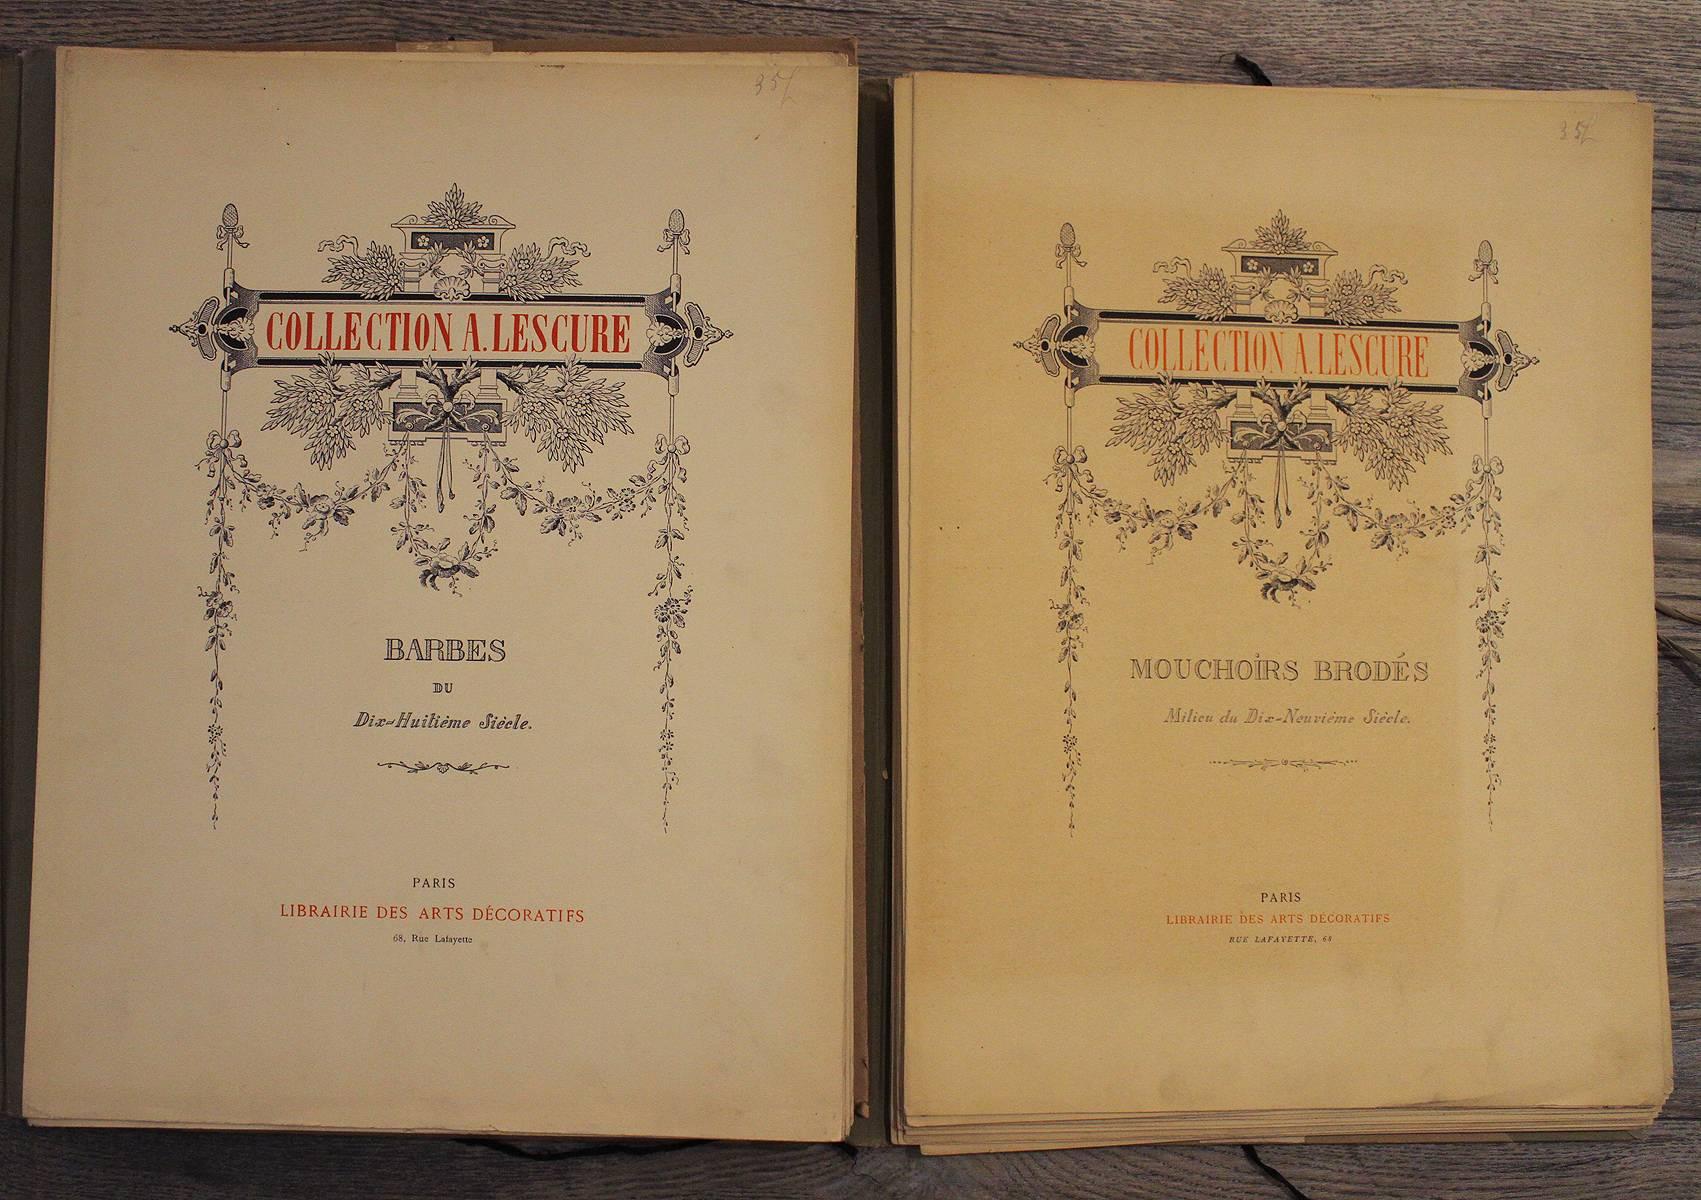 French Collection Lescure Extremely Rare Portfolios About Lace For Sale